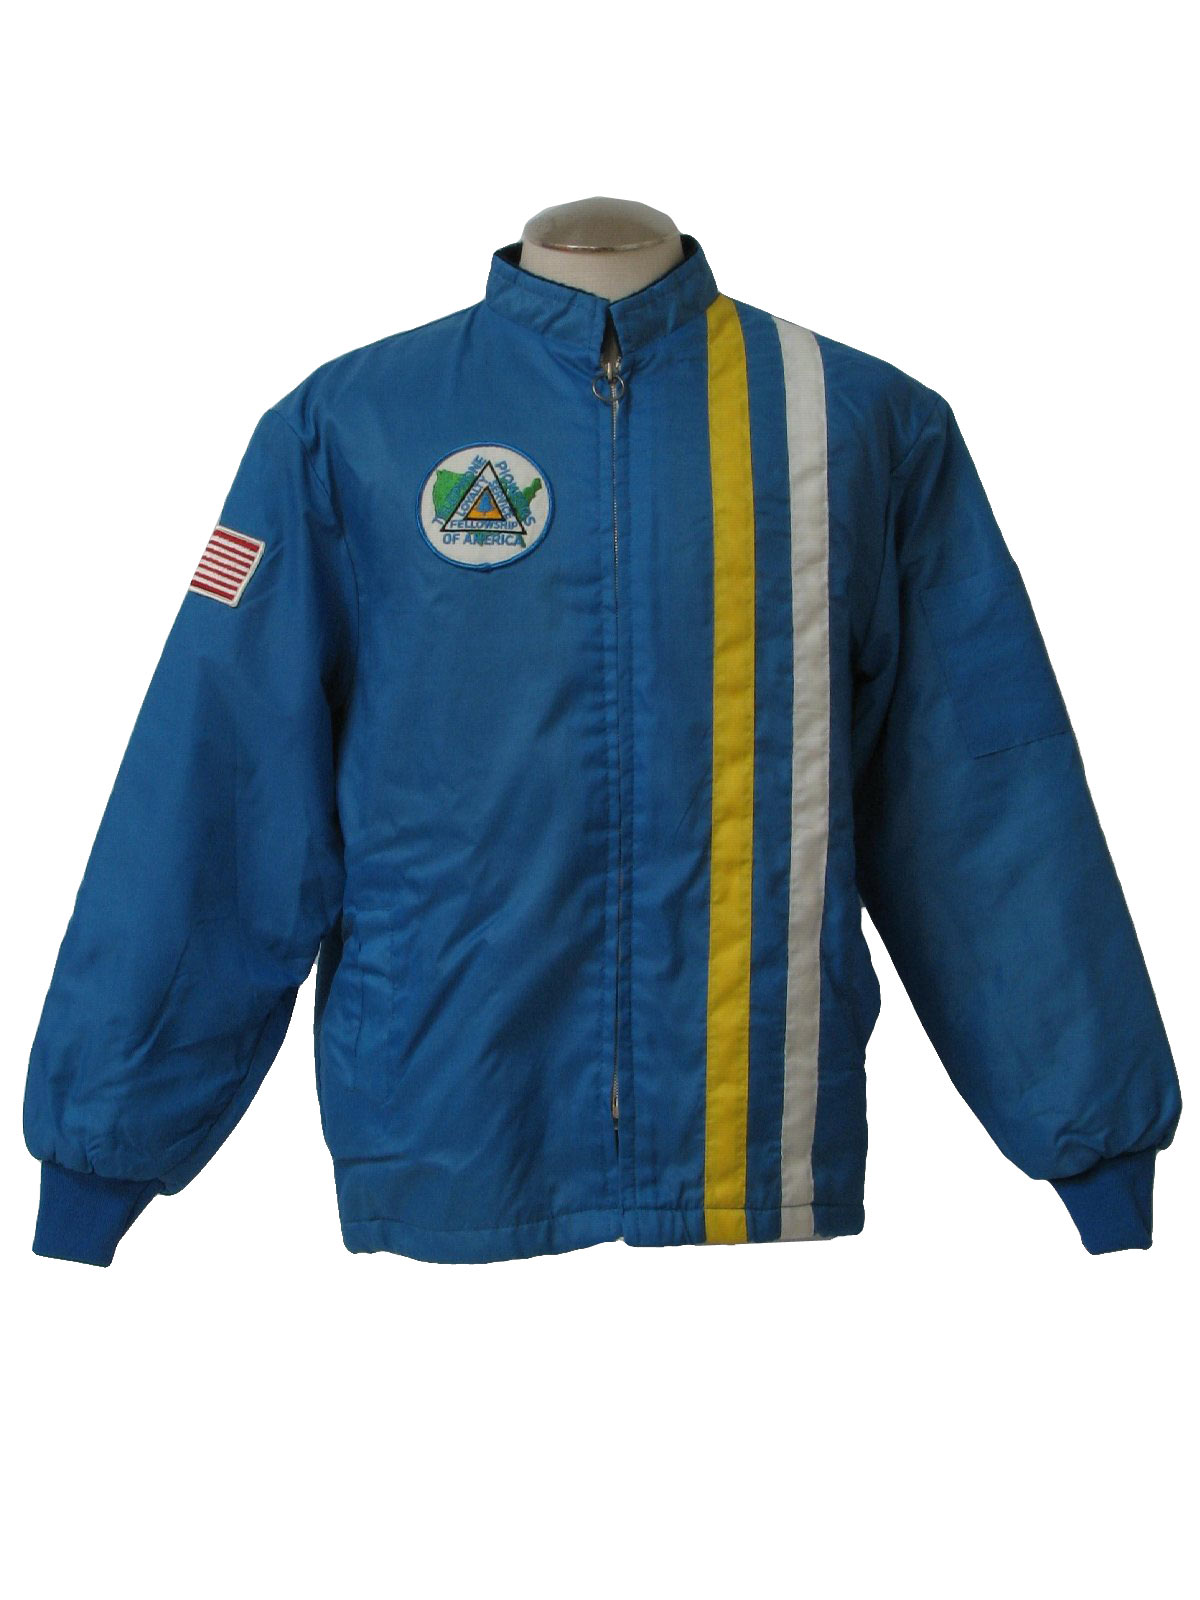 Retro 1970's Jacket (The Great Lakes) : 70s -The Great Lakes- Mens sky ...